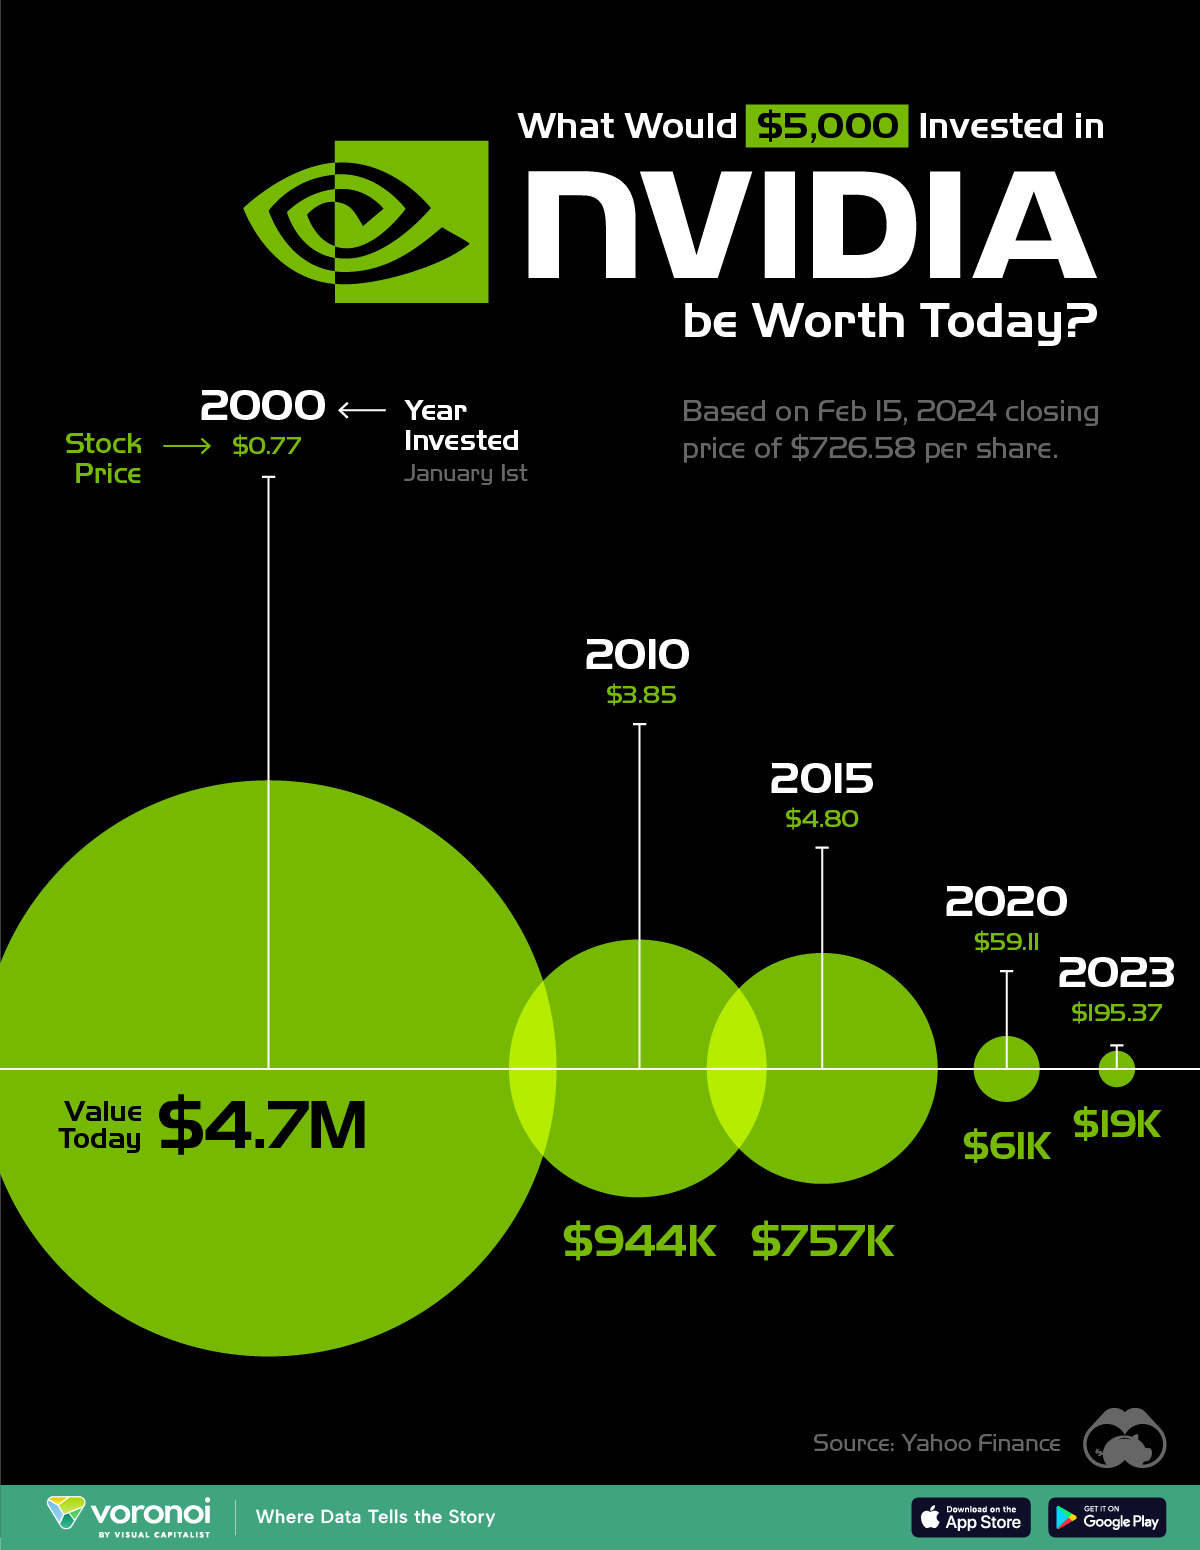 This circle graphic shows how much investors would have made by investing in Nvidia before it's price skyrocketed.